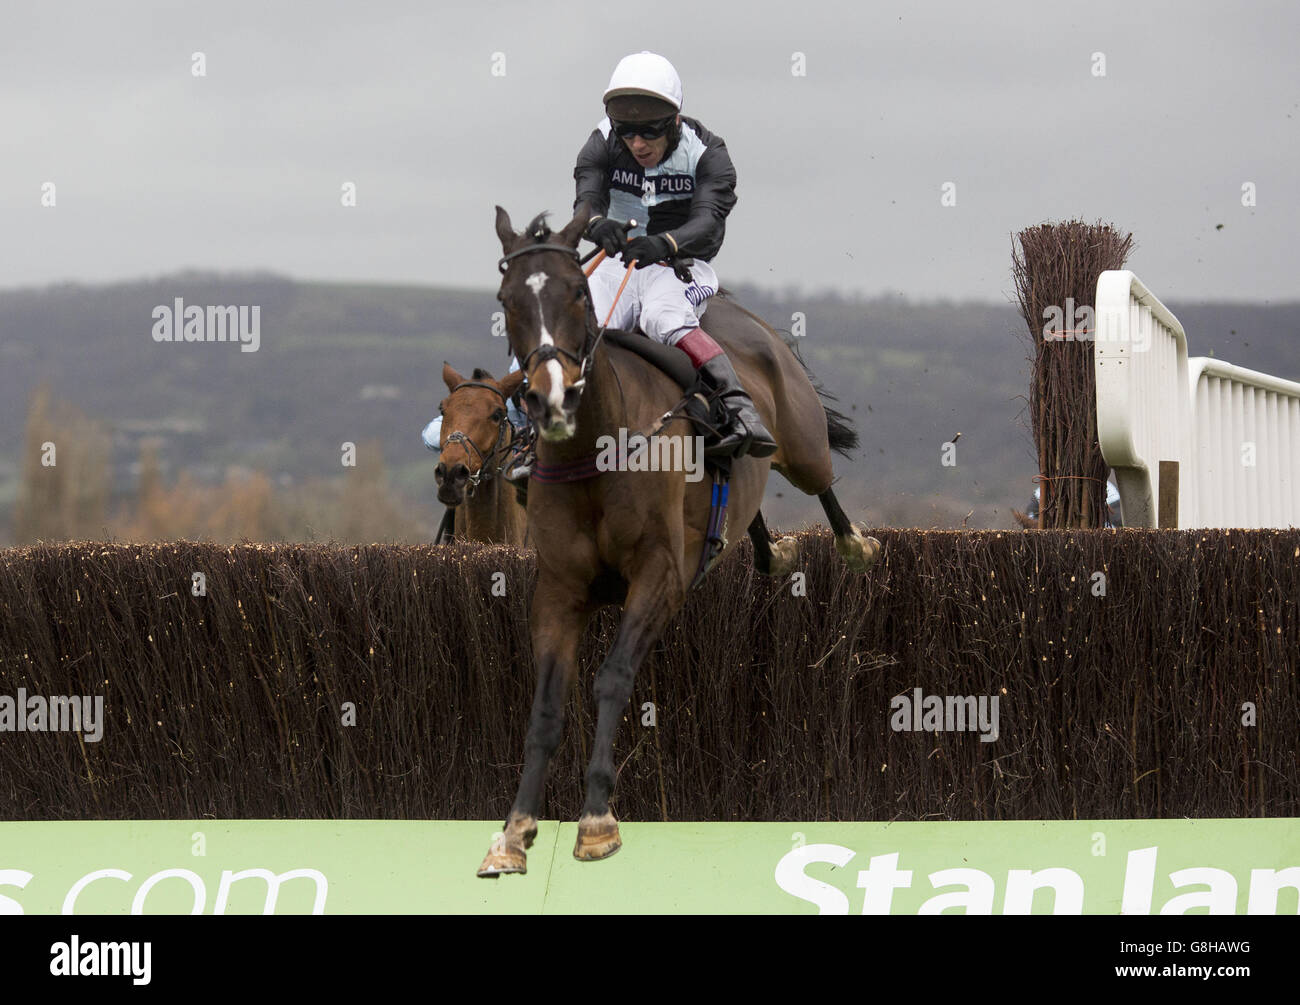 Village Vic ridden by Richard Johnson clears the last fence before going on to win The Caspian Caviar Gold Cup Race run during day two of The International at Cheltenham Racecourse. Stock Photo